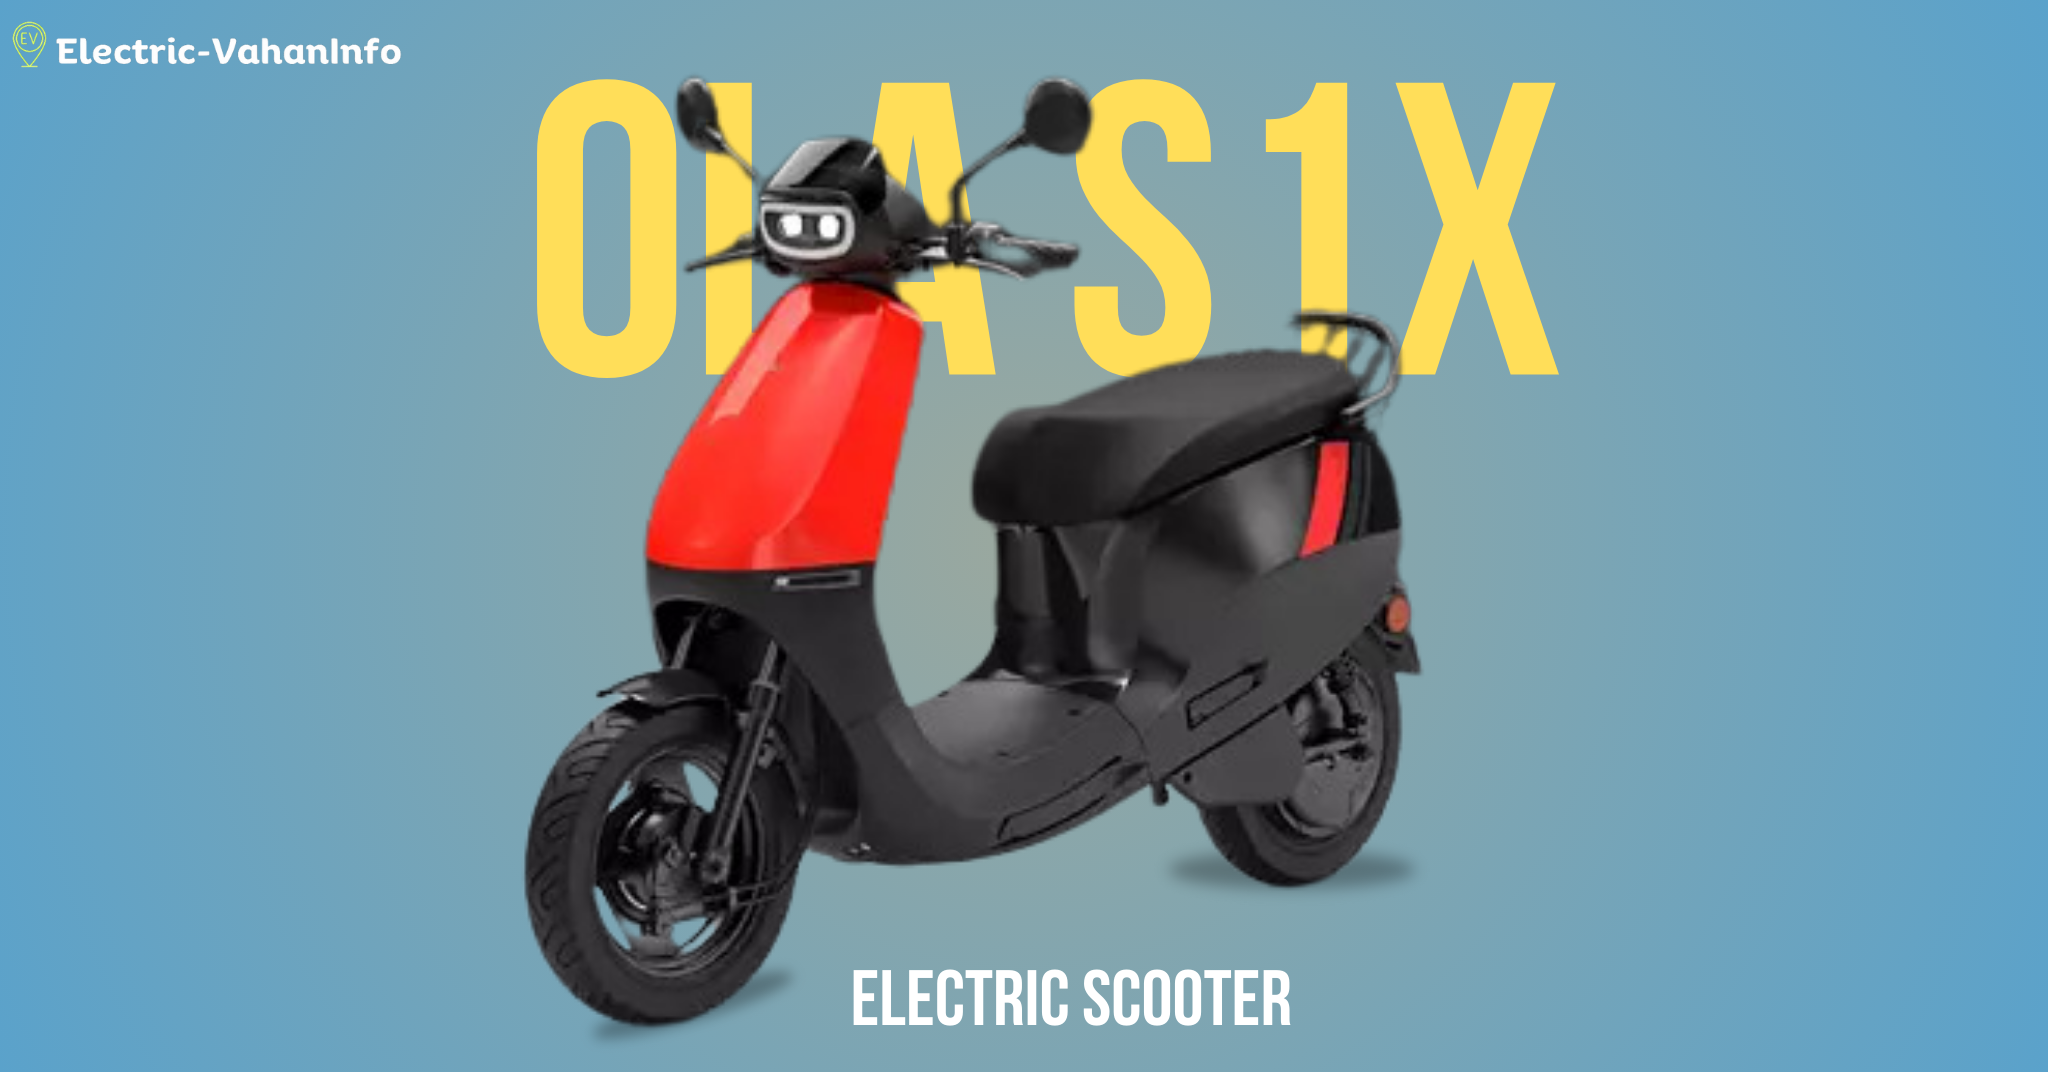 https://electric-vahaninfo.com/ola-s1x-electric-scooter-price-range-variants-specifications/